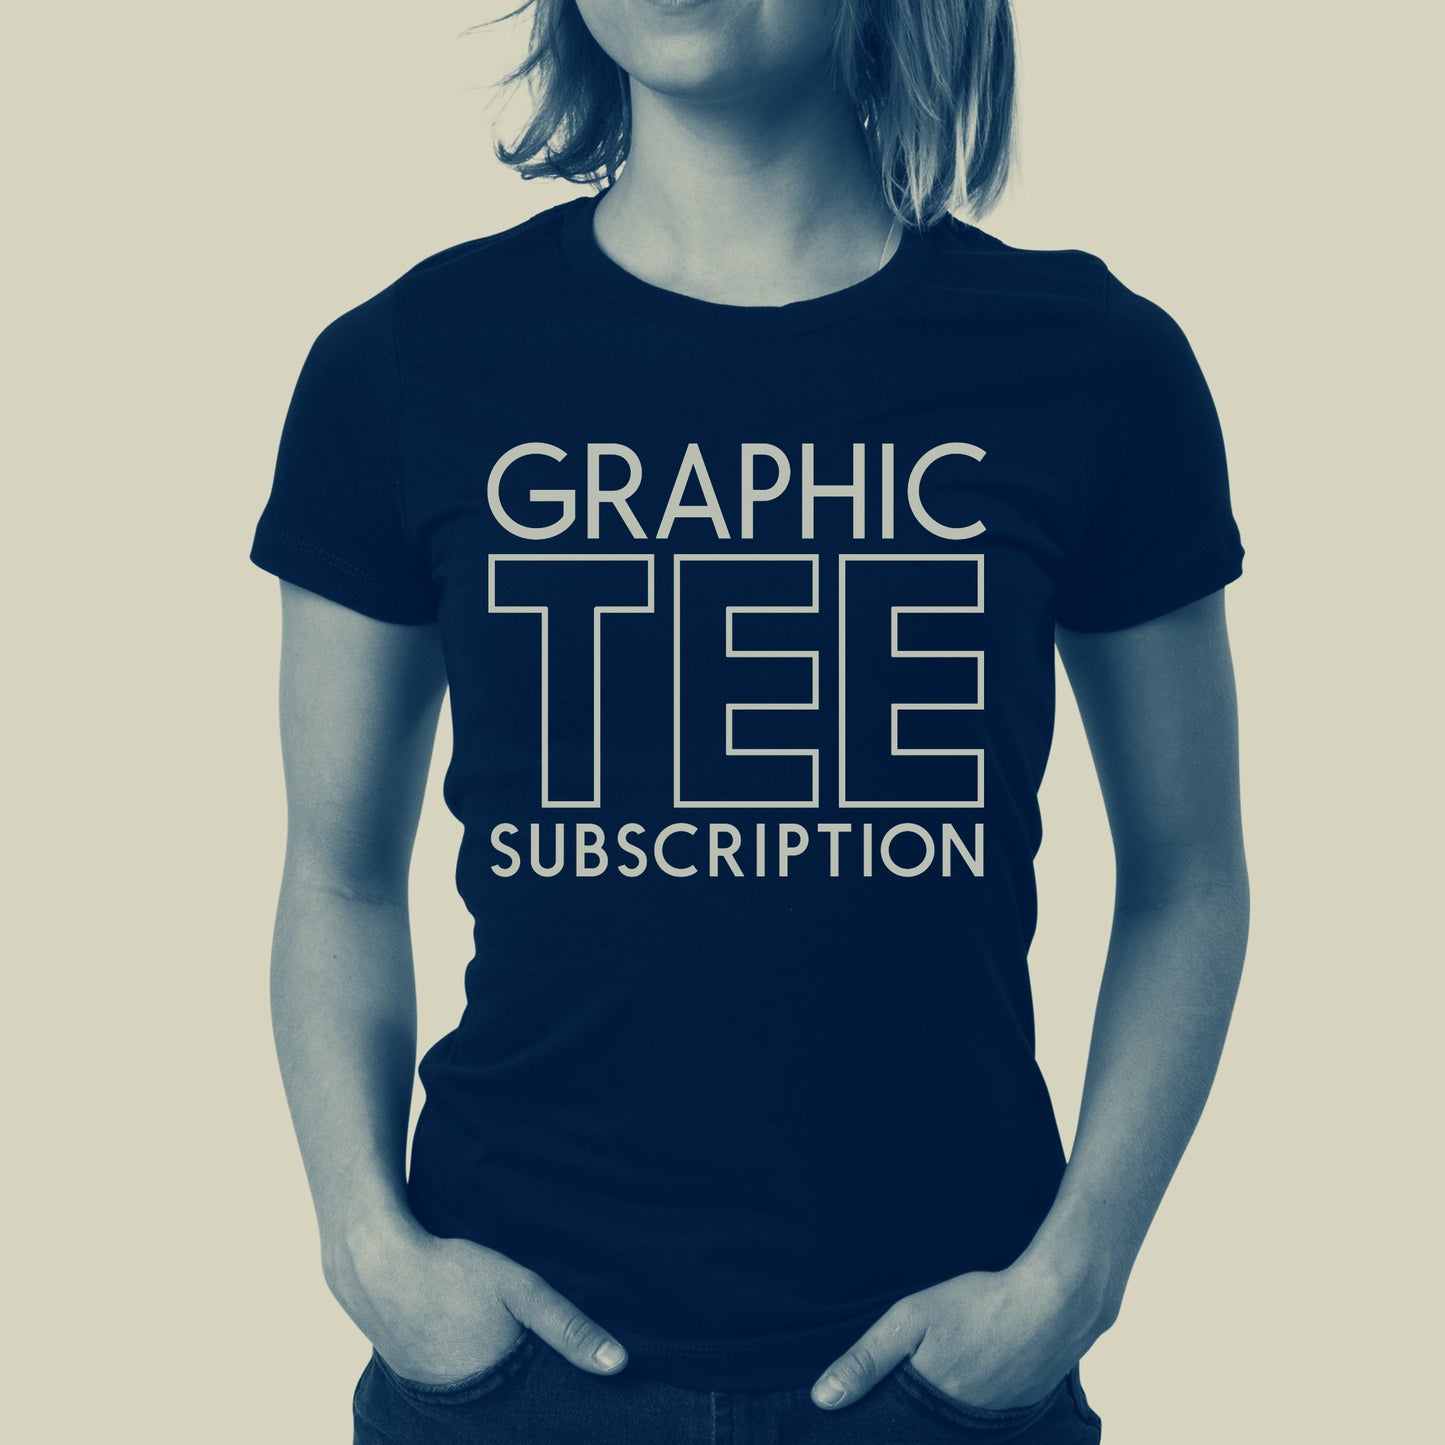 2046 Graphic Tee Subscription (Women's Cut)